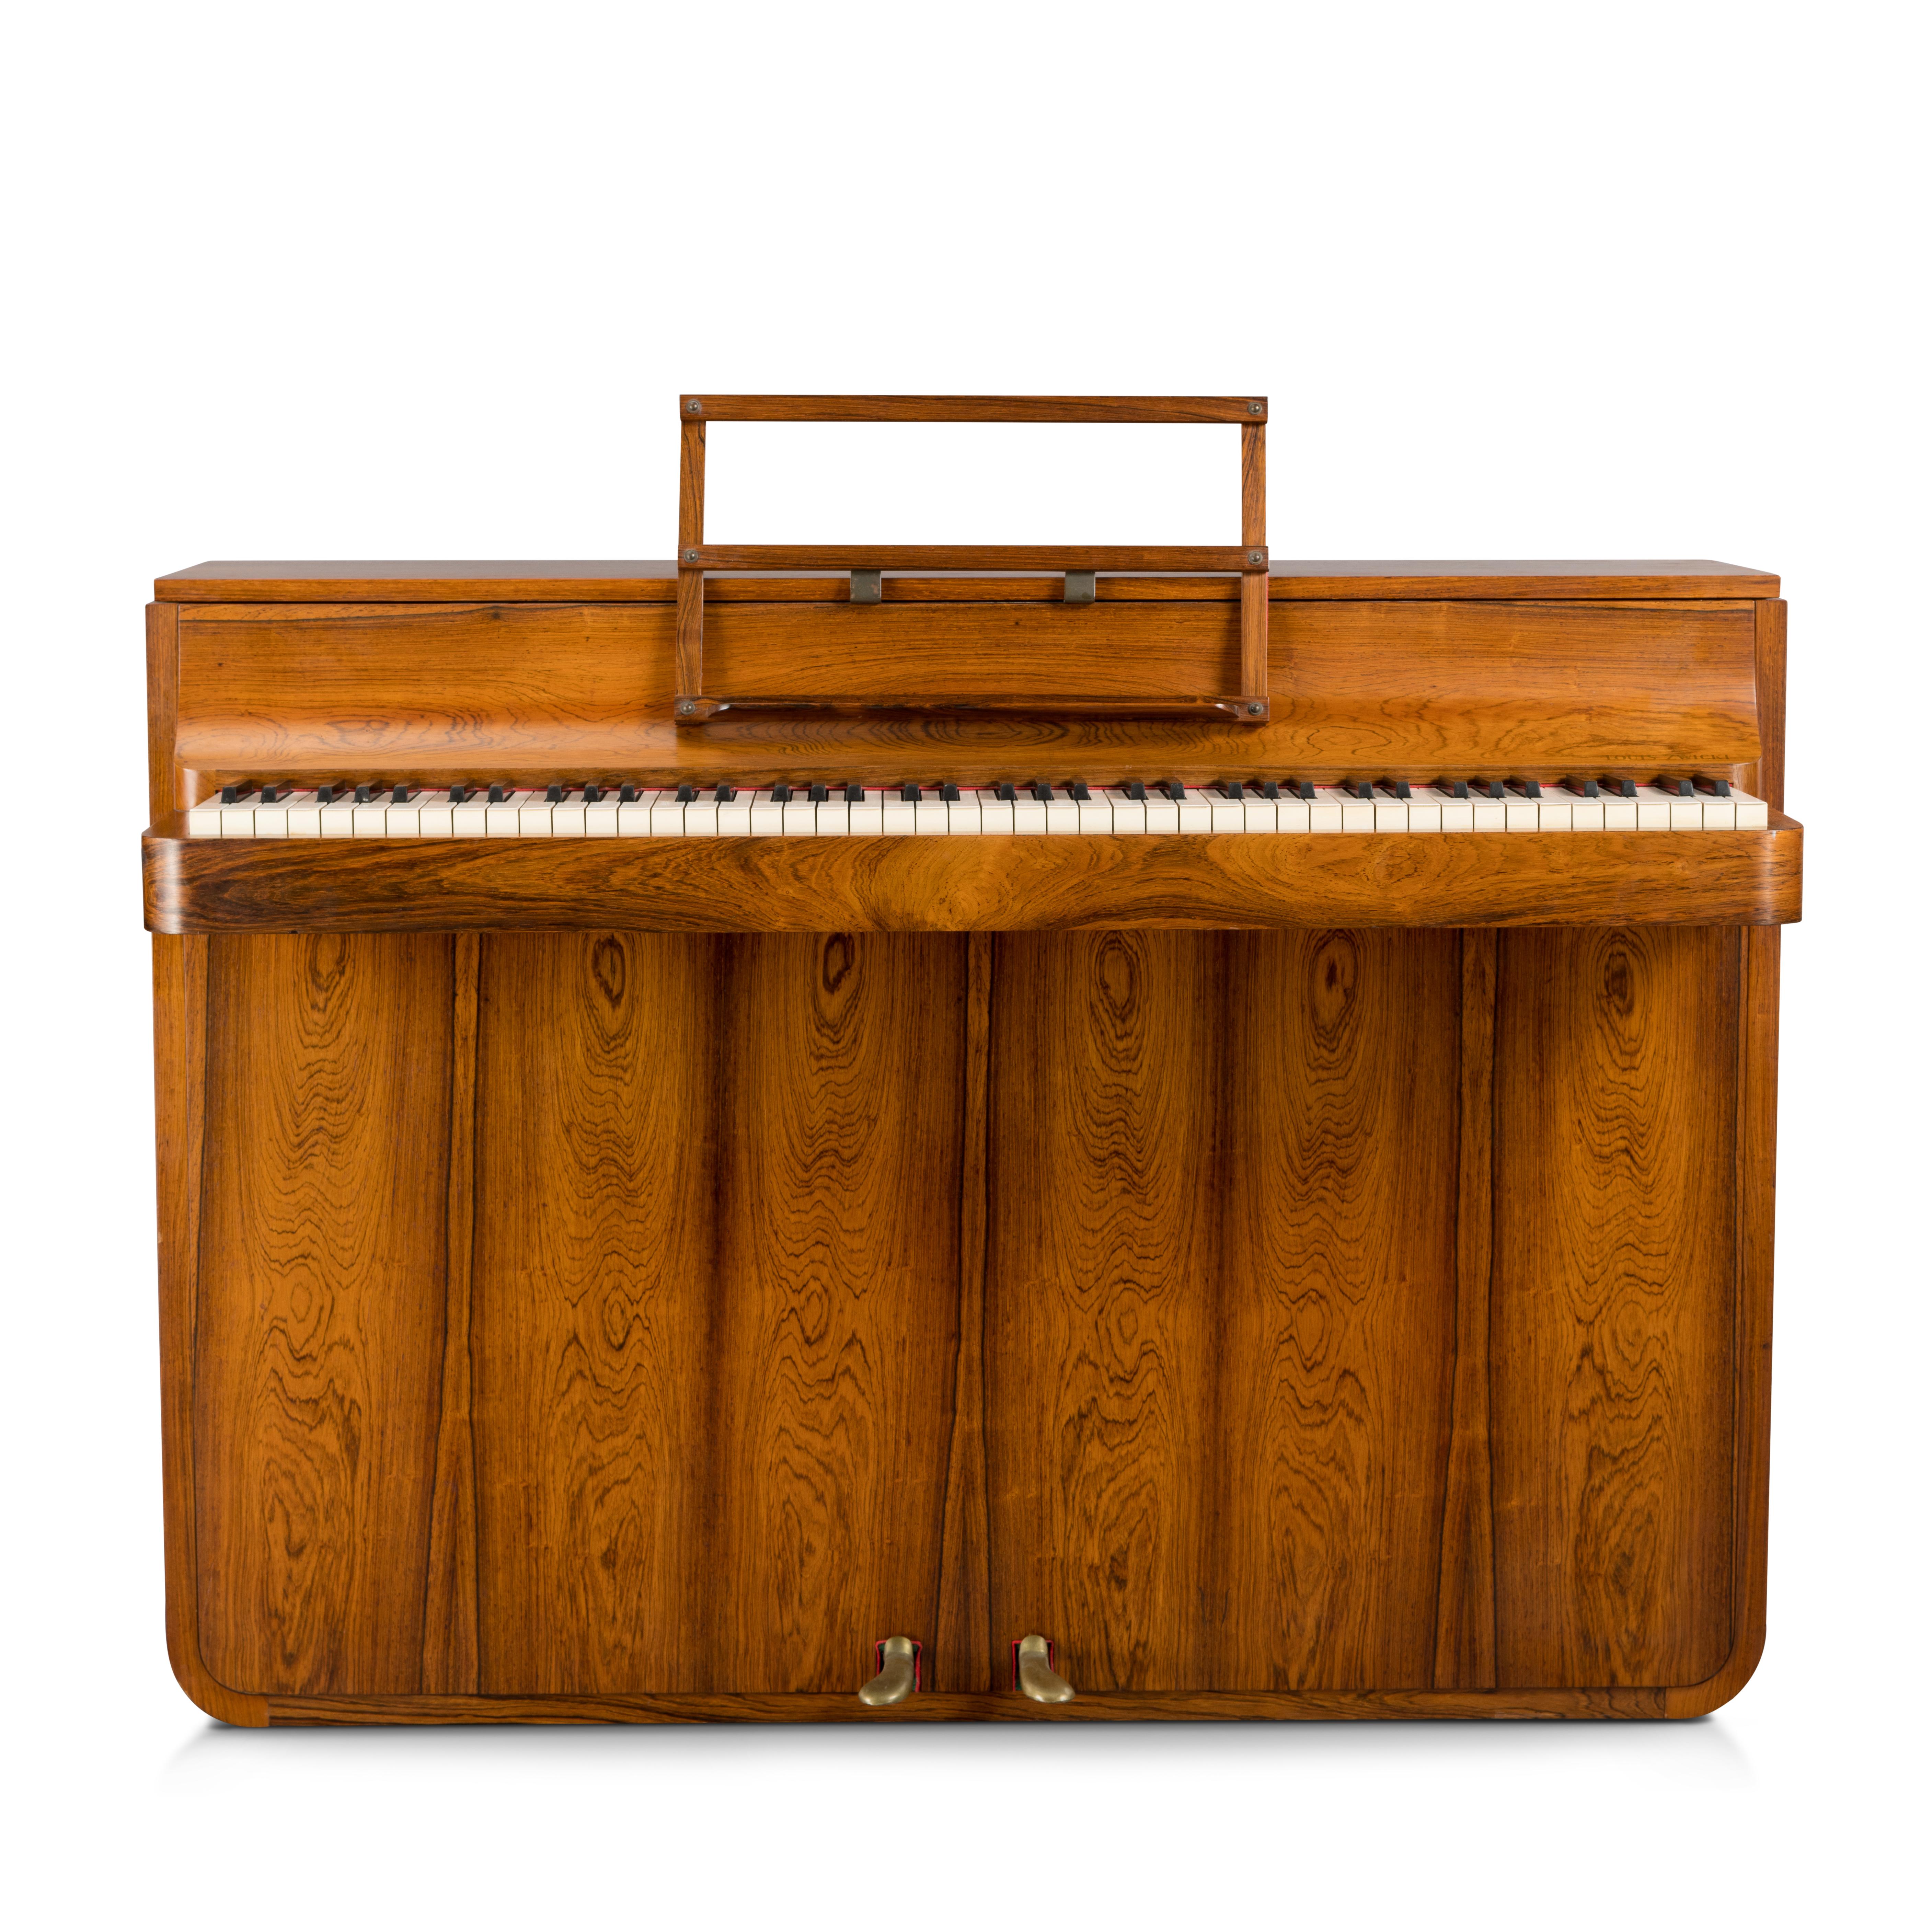 A rare Danish midcentury pianette made of magnificent wood. It is called pianette due to the 82 keys rather than the standard 88 of a full size piano. This pianette is made by renowned piano maker Louis Zwicki. This piece stands out in a modern